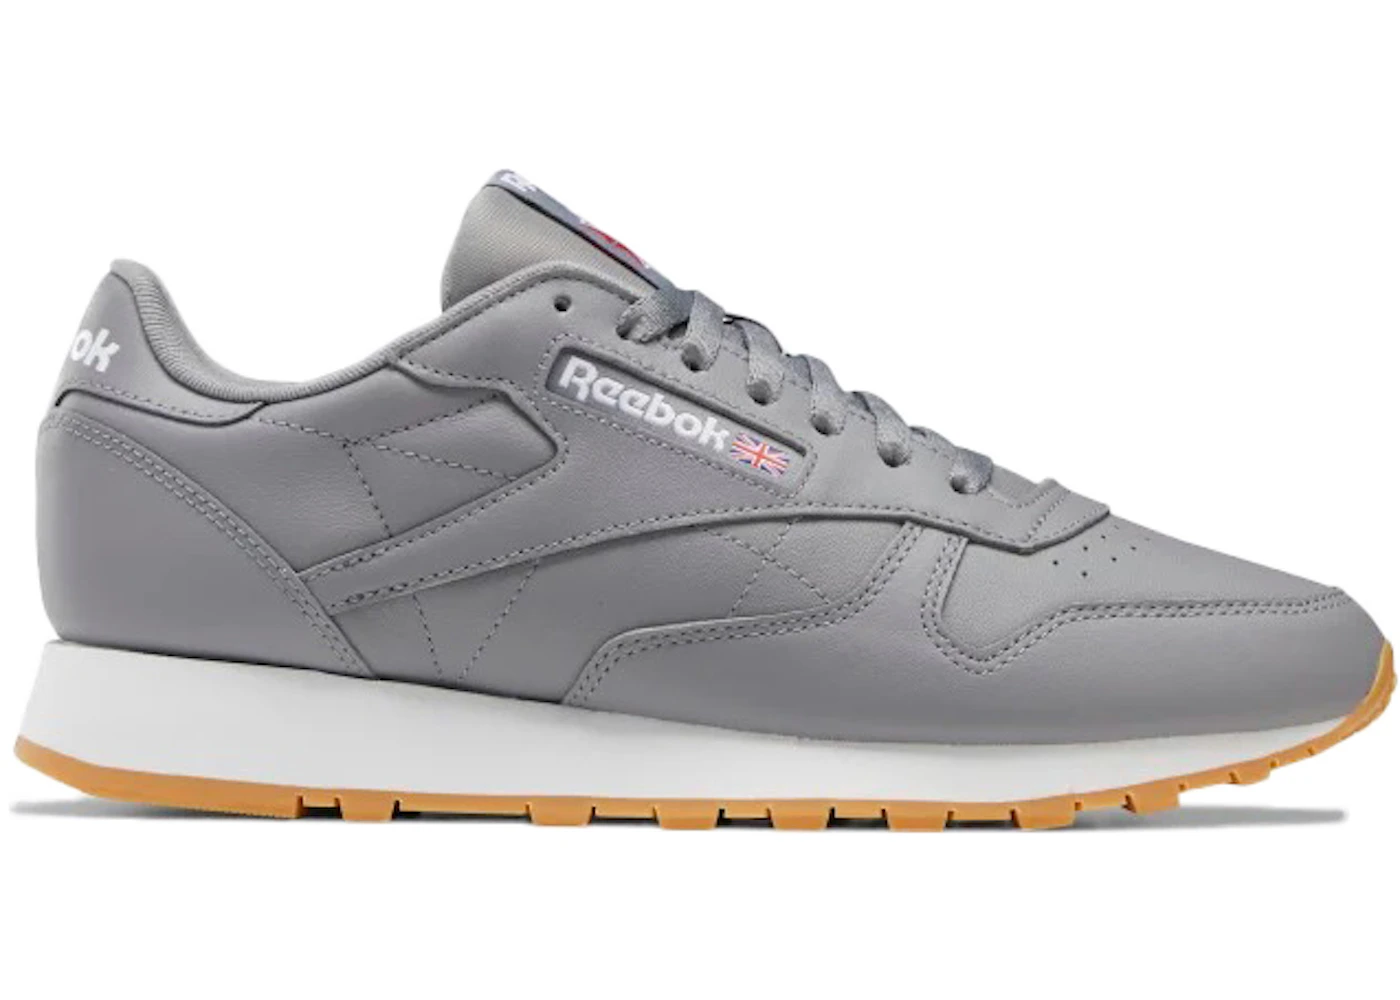 Reebok Classic Leather Pure Grey Gum Men's - GY3599 - US